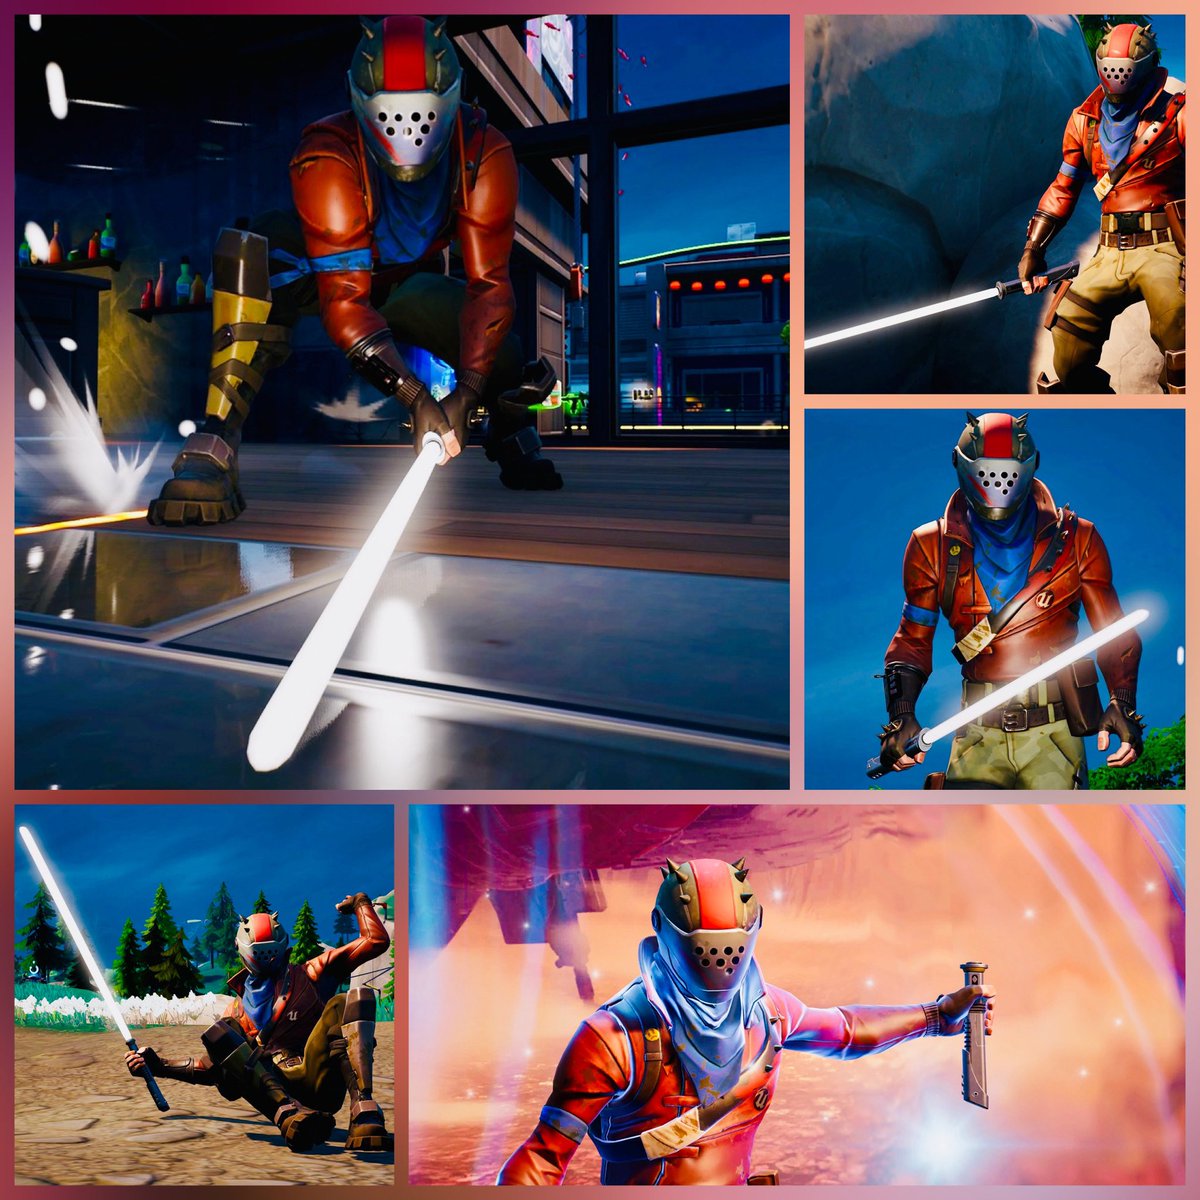 I Like Firsts. Good Or Bad They're Always Memorable.

#Fortography #Fortnite
#FortniteArt #FortniteChapter4 #VirtualPhotography #FortniteChapter4Season4     
#FortniteLastResort      #FortniteCh4S4  #FortniteXStarWars #FortniteStarWars #StarWars #FindtheForce